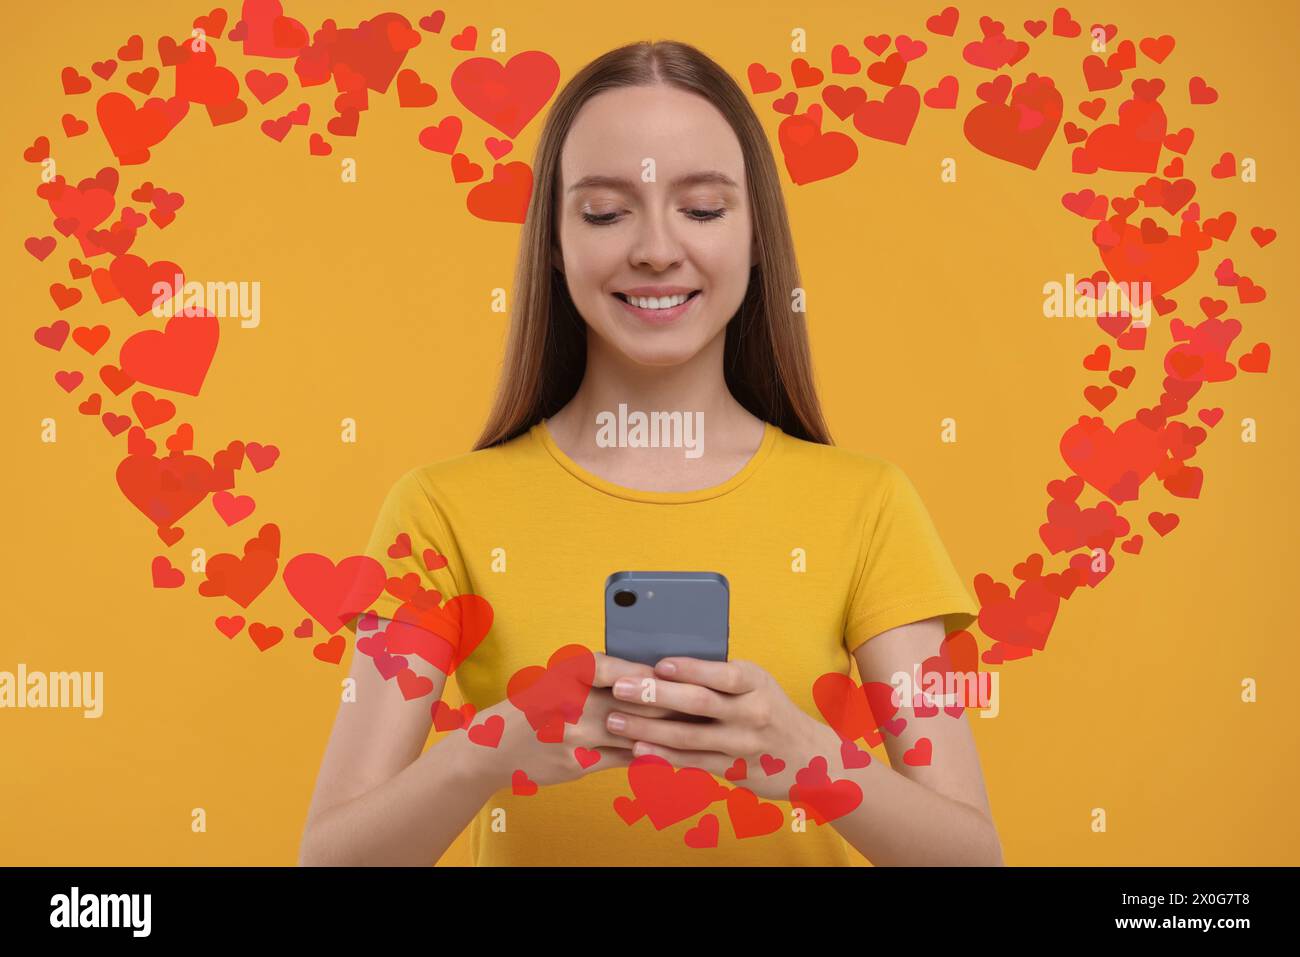 Long distance love. Woman chatting with sweetheart via smartphone on golden background. Hearts flying out of device and swirling around her Stock Photo